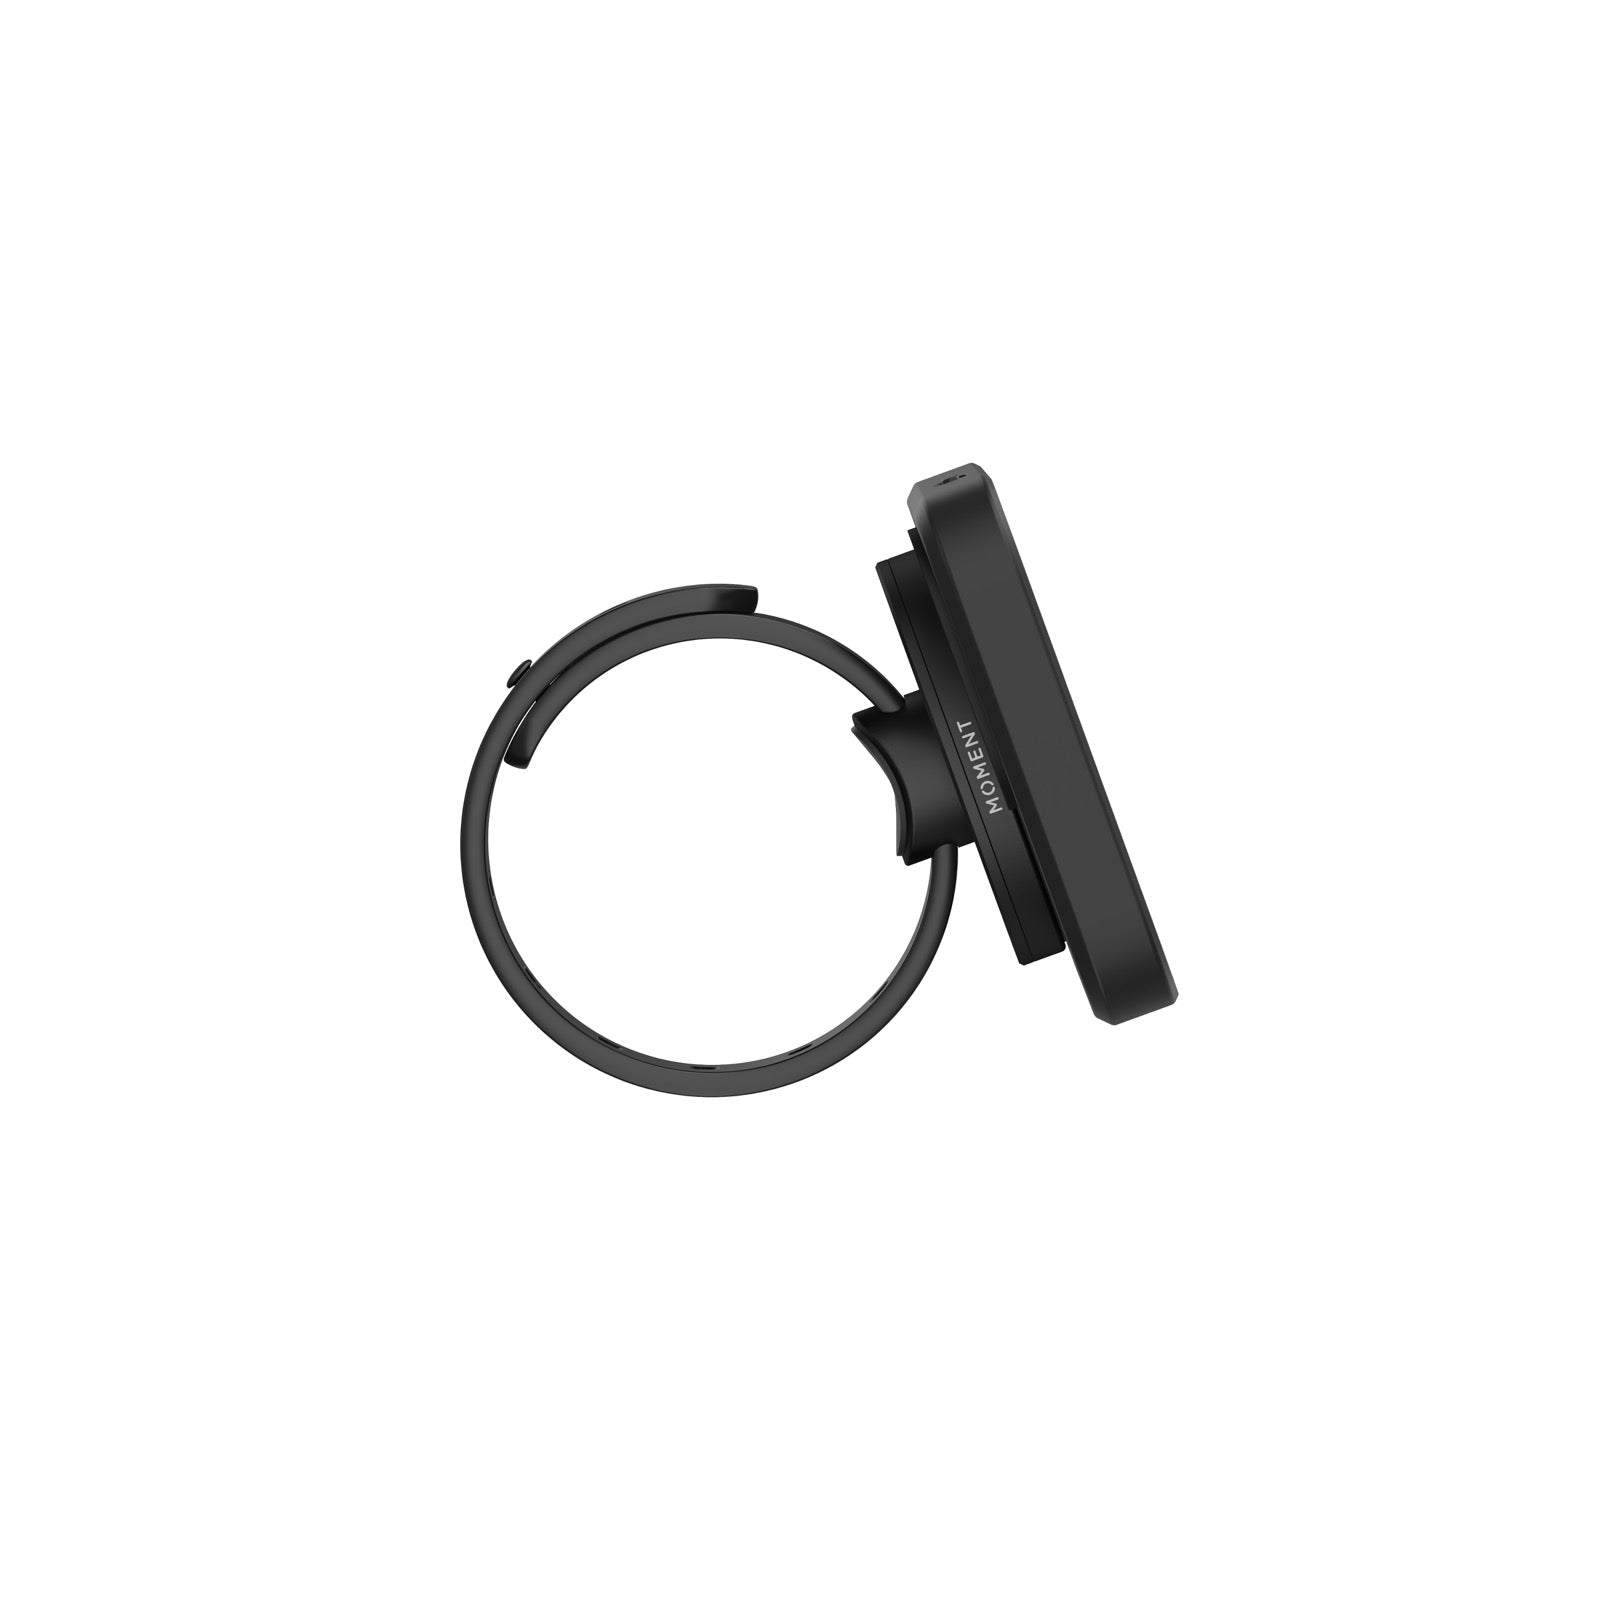 Strap Anywhere Mount with MagSafe - The Usual